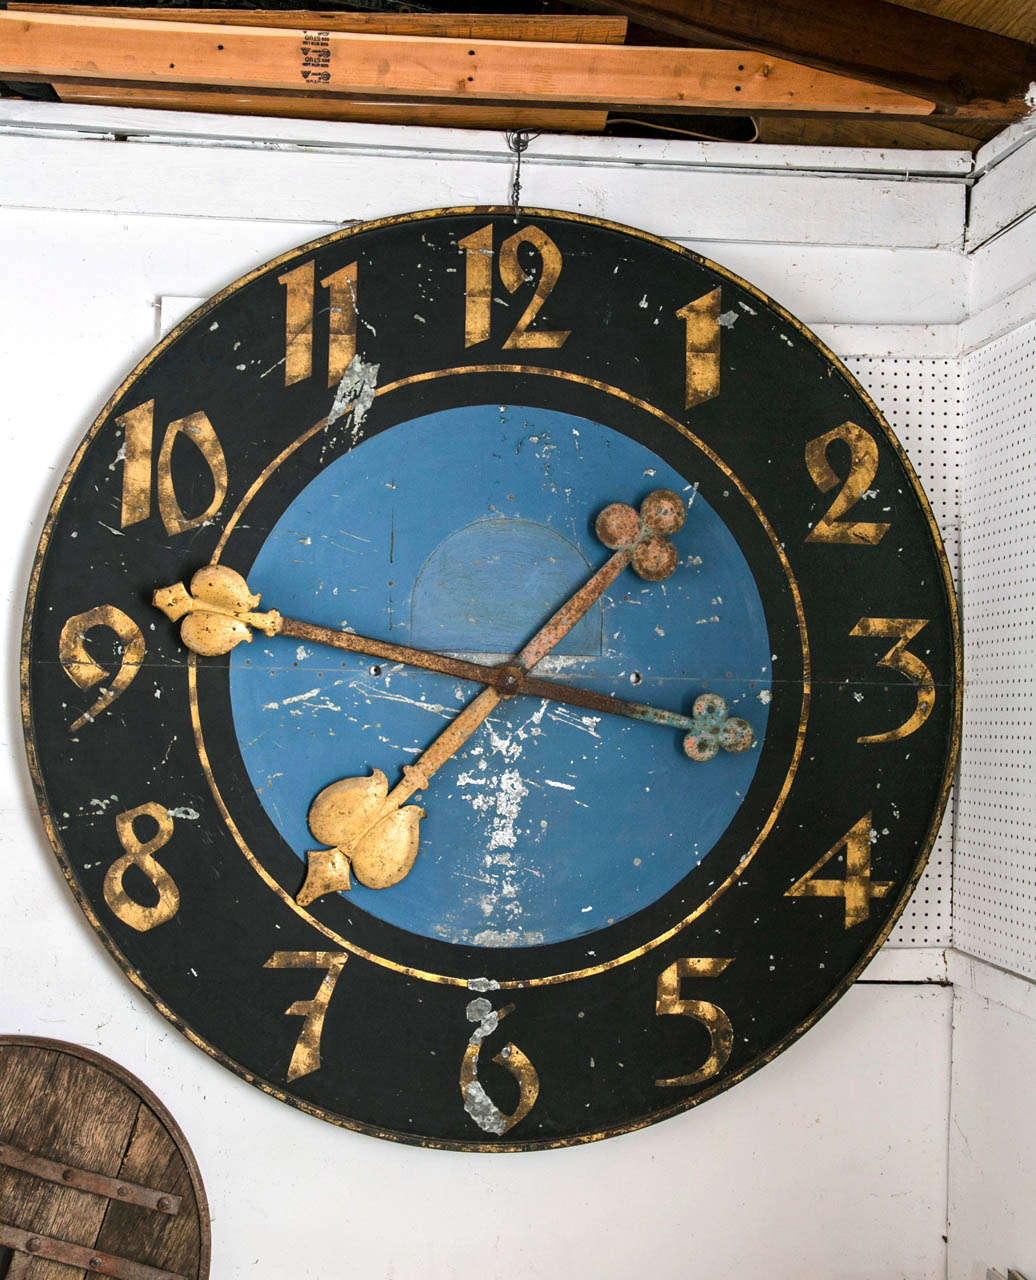 The clock is from a railway station in the North of France, it is painted steel with gilt numbers and hands.